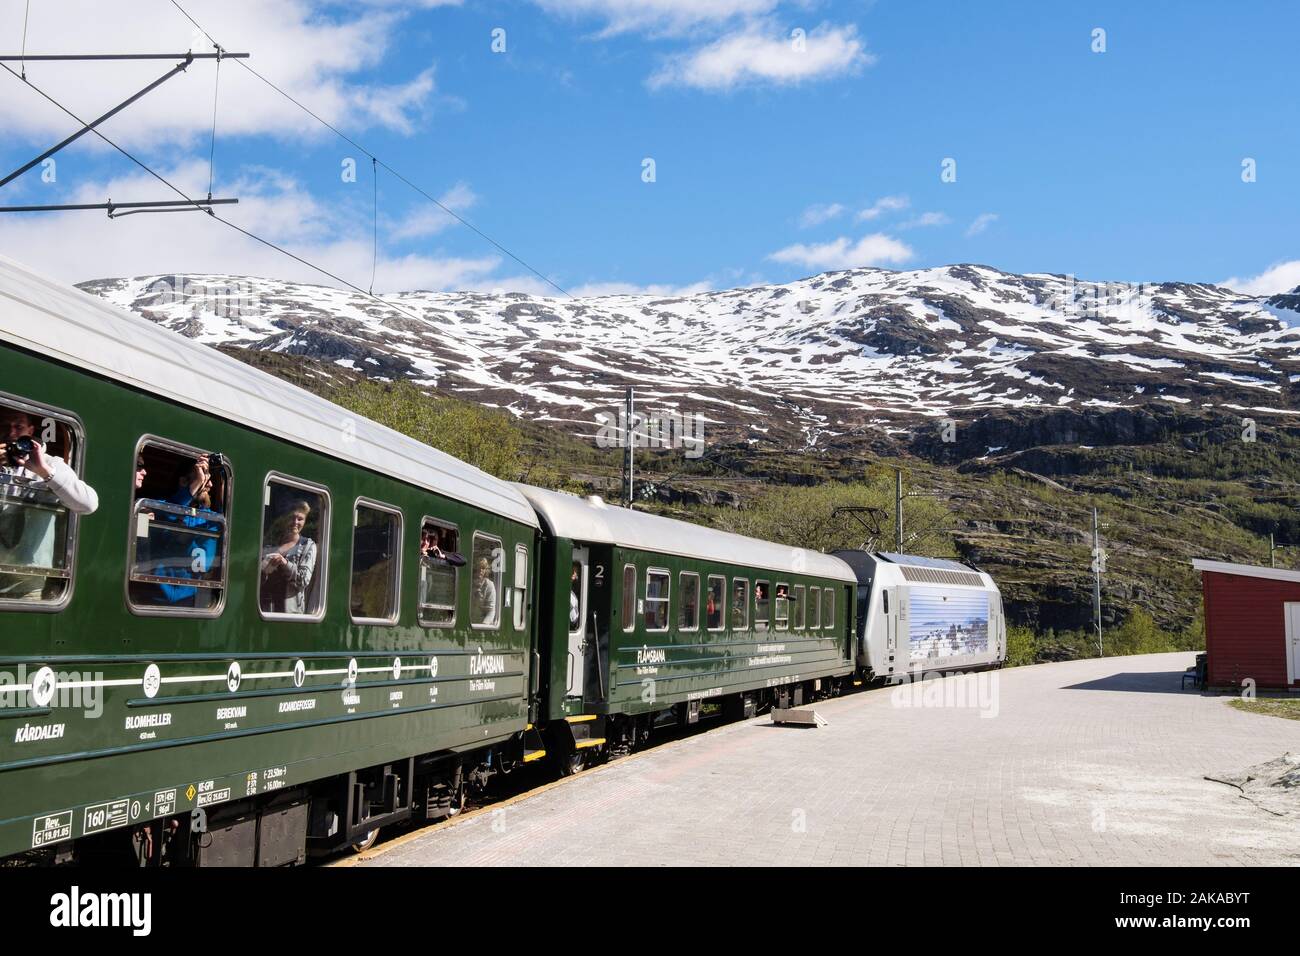 Tourist travelling on Flam Railway train by the station platform with view to scenic snowcapped mountains. Vatnahelsen, Aurland, Norway, Scandinavia Stock Photo